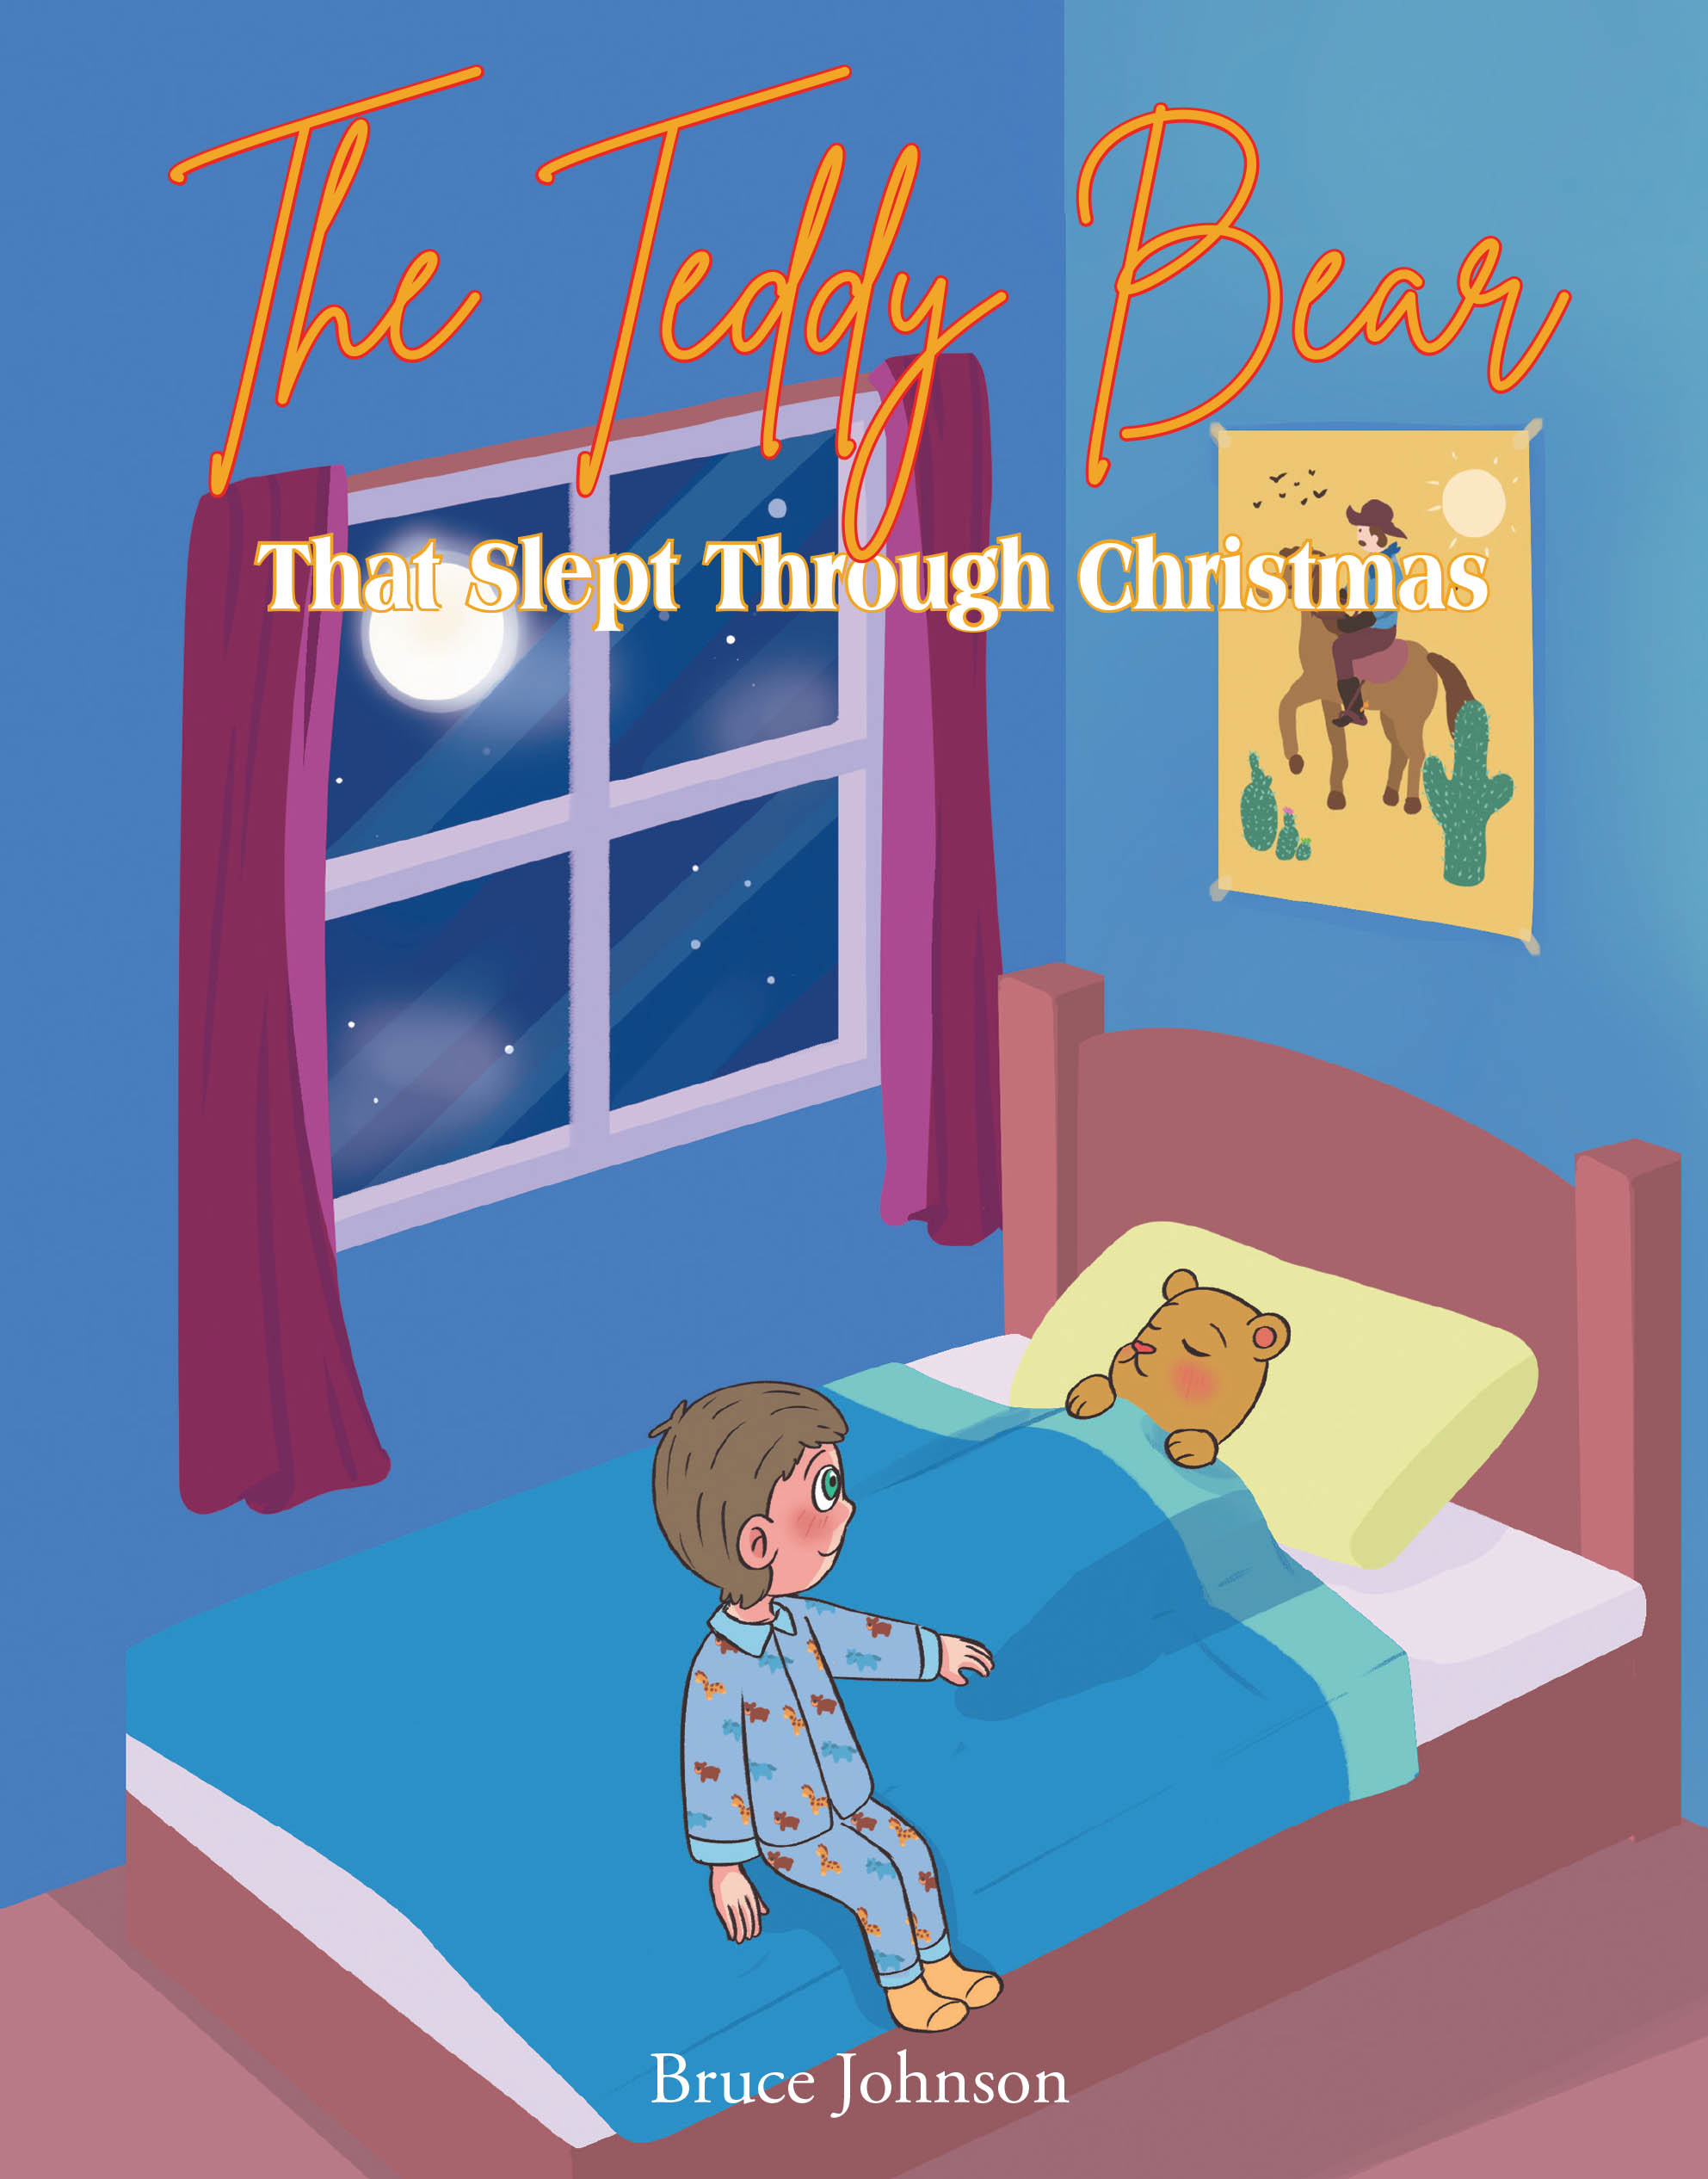 Bruce Johnson’s Newly Released “The Teddy Bear That Slept Through Christmas” is a Heartwarming Story of a Christmas to Remember